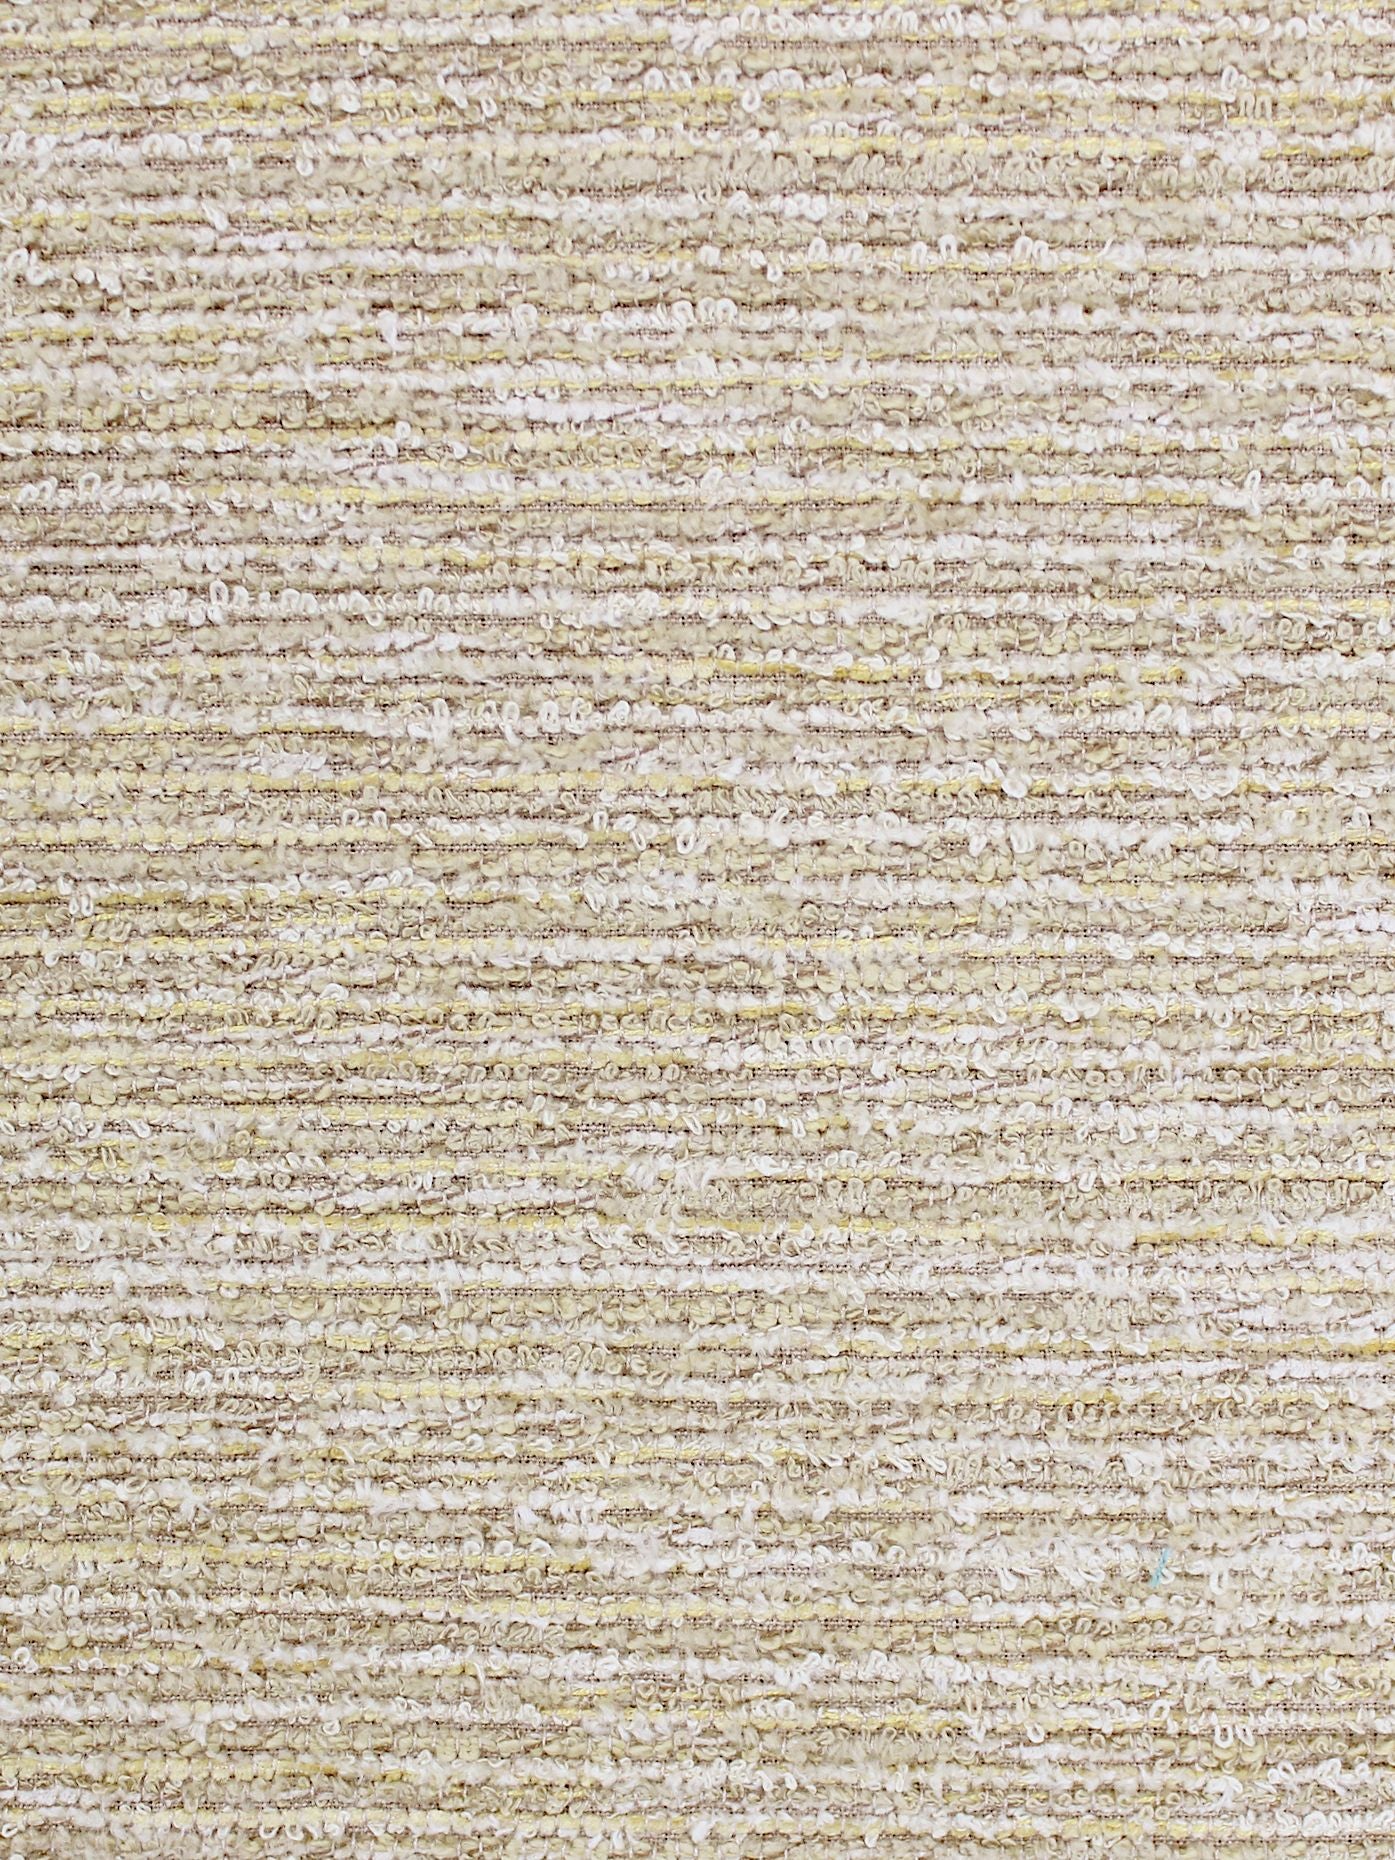 Southerness fabric in straw color - pattern number SC 000226959 - by Scalamandre in the Scalamandre Fabrics Book 1 collection